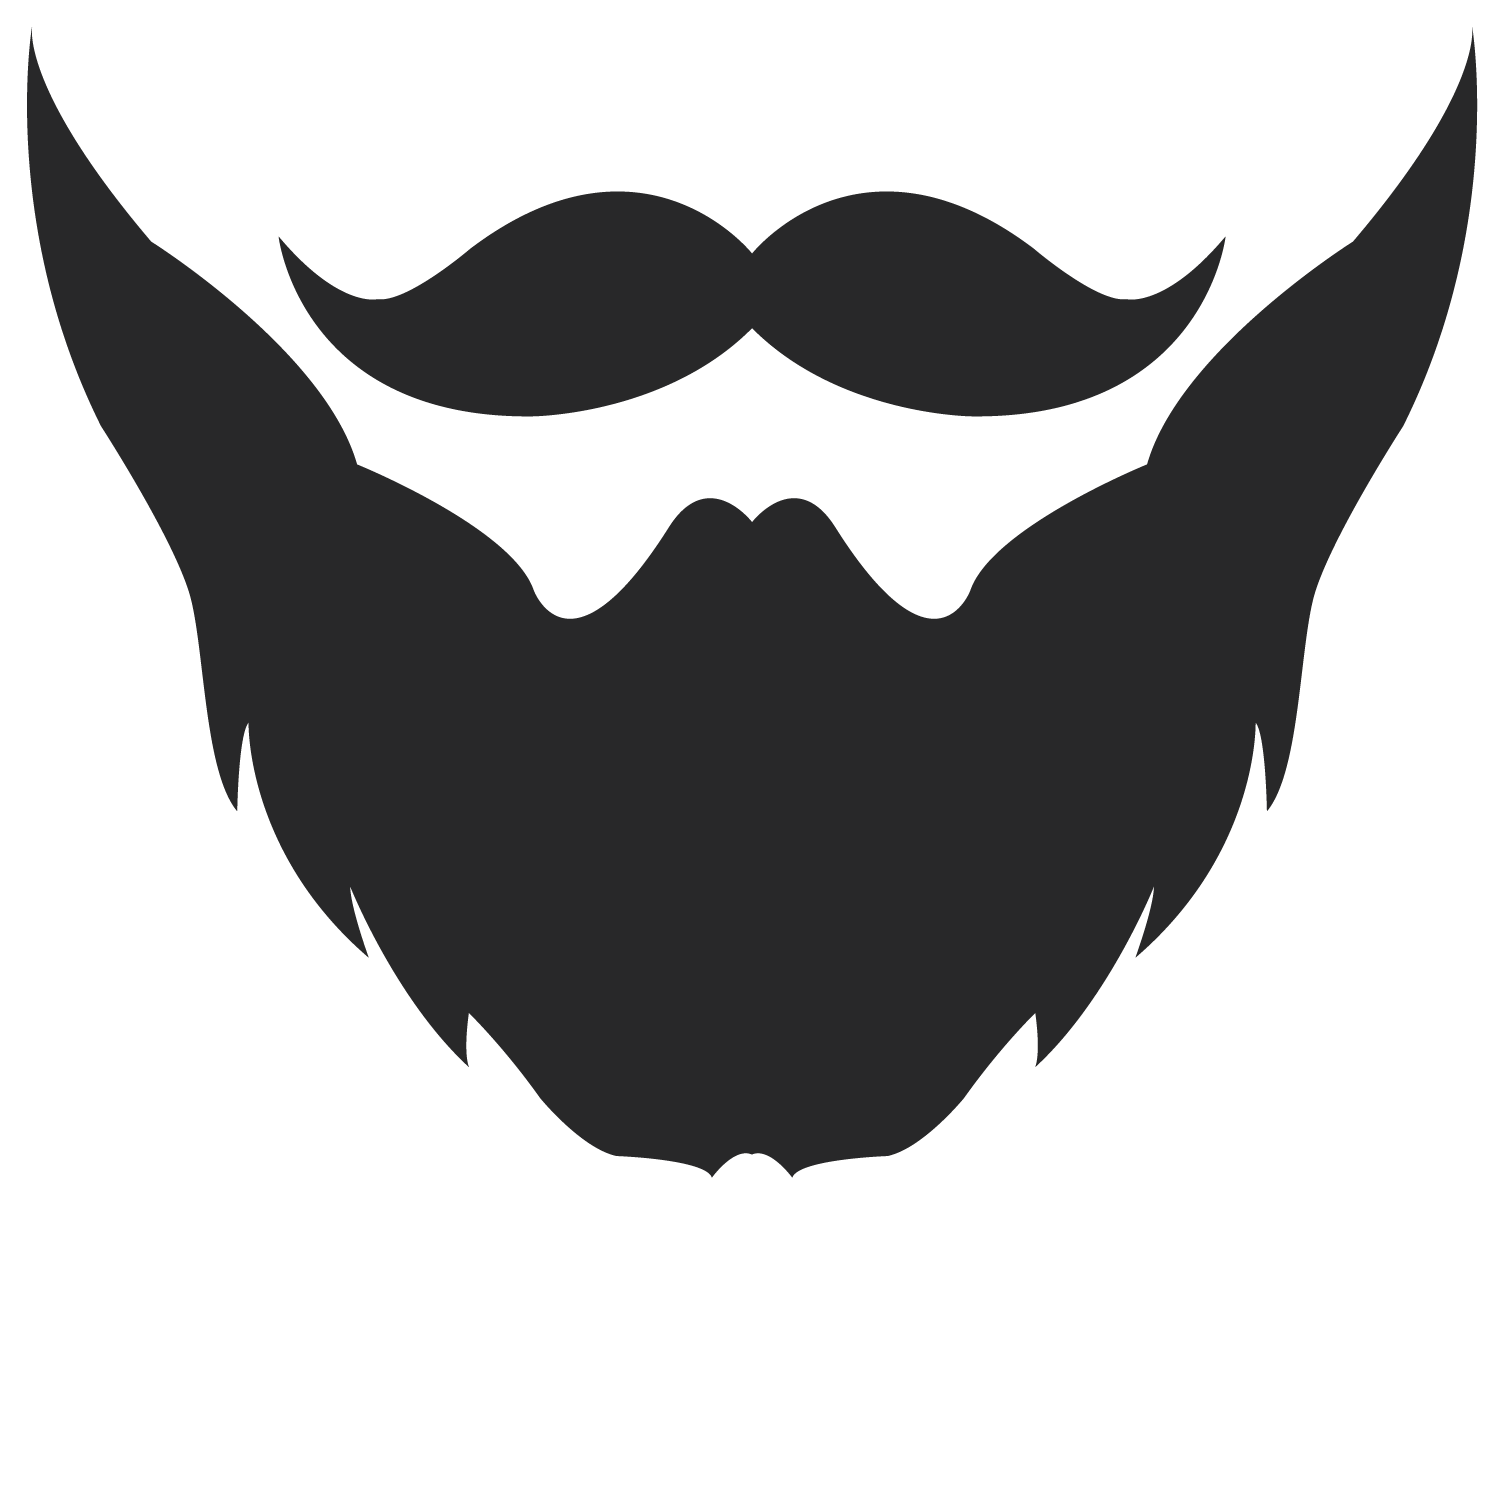 Beard Clipart - Adding Style and Personality to Your Designs